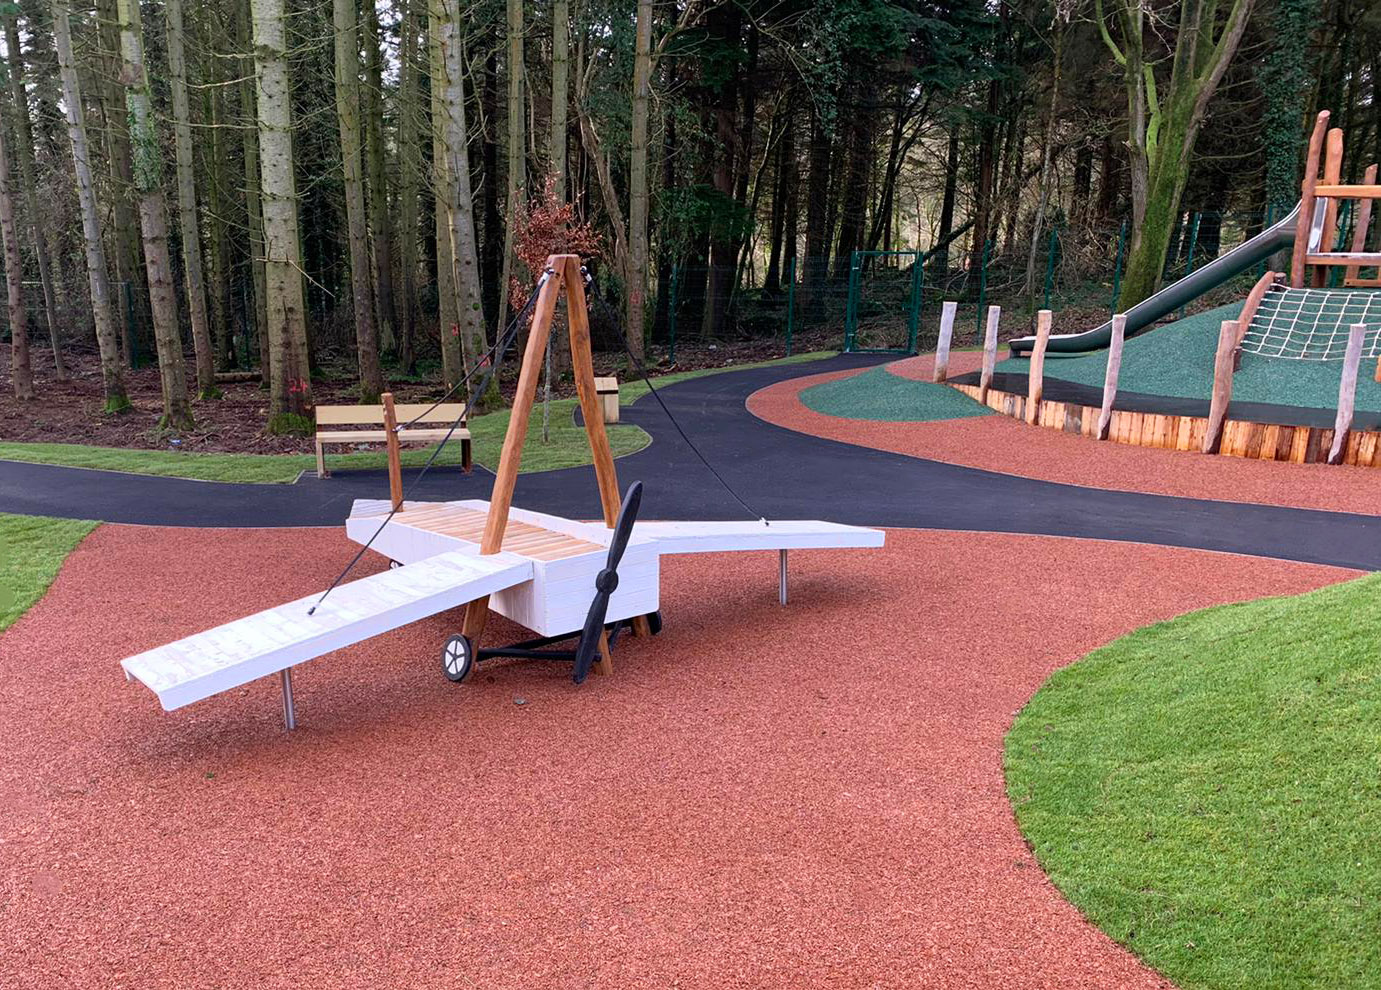 Timber aeroplane play structure with propellor